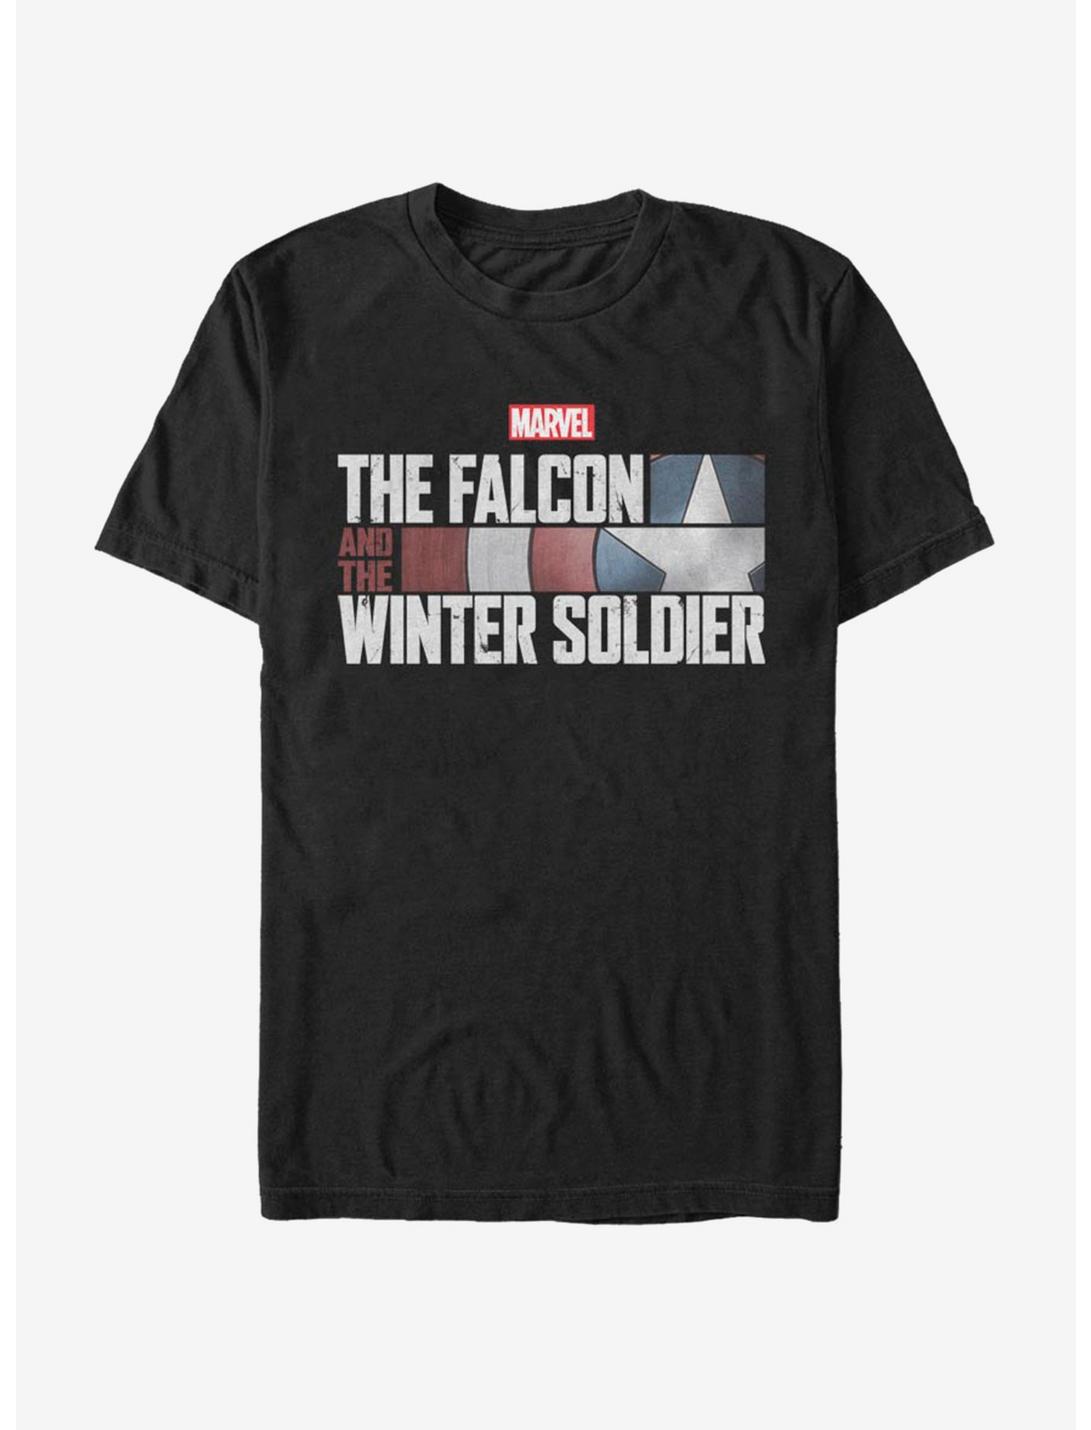 Marvel The Falcon And The Winter Soldier T-Shirt, BLACK, hi-res